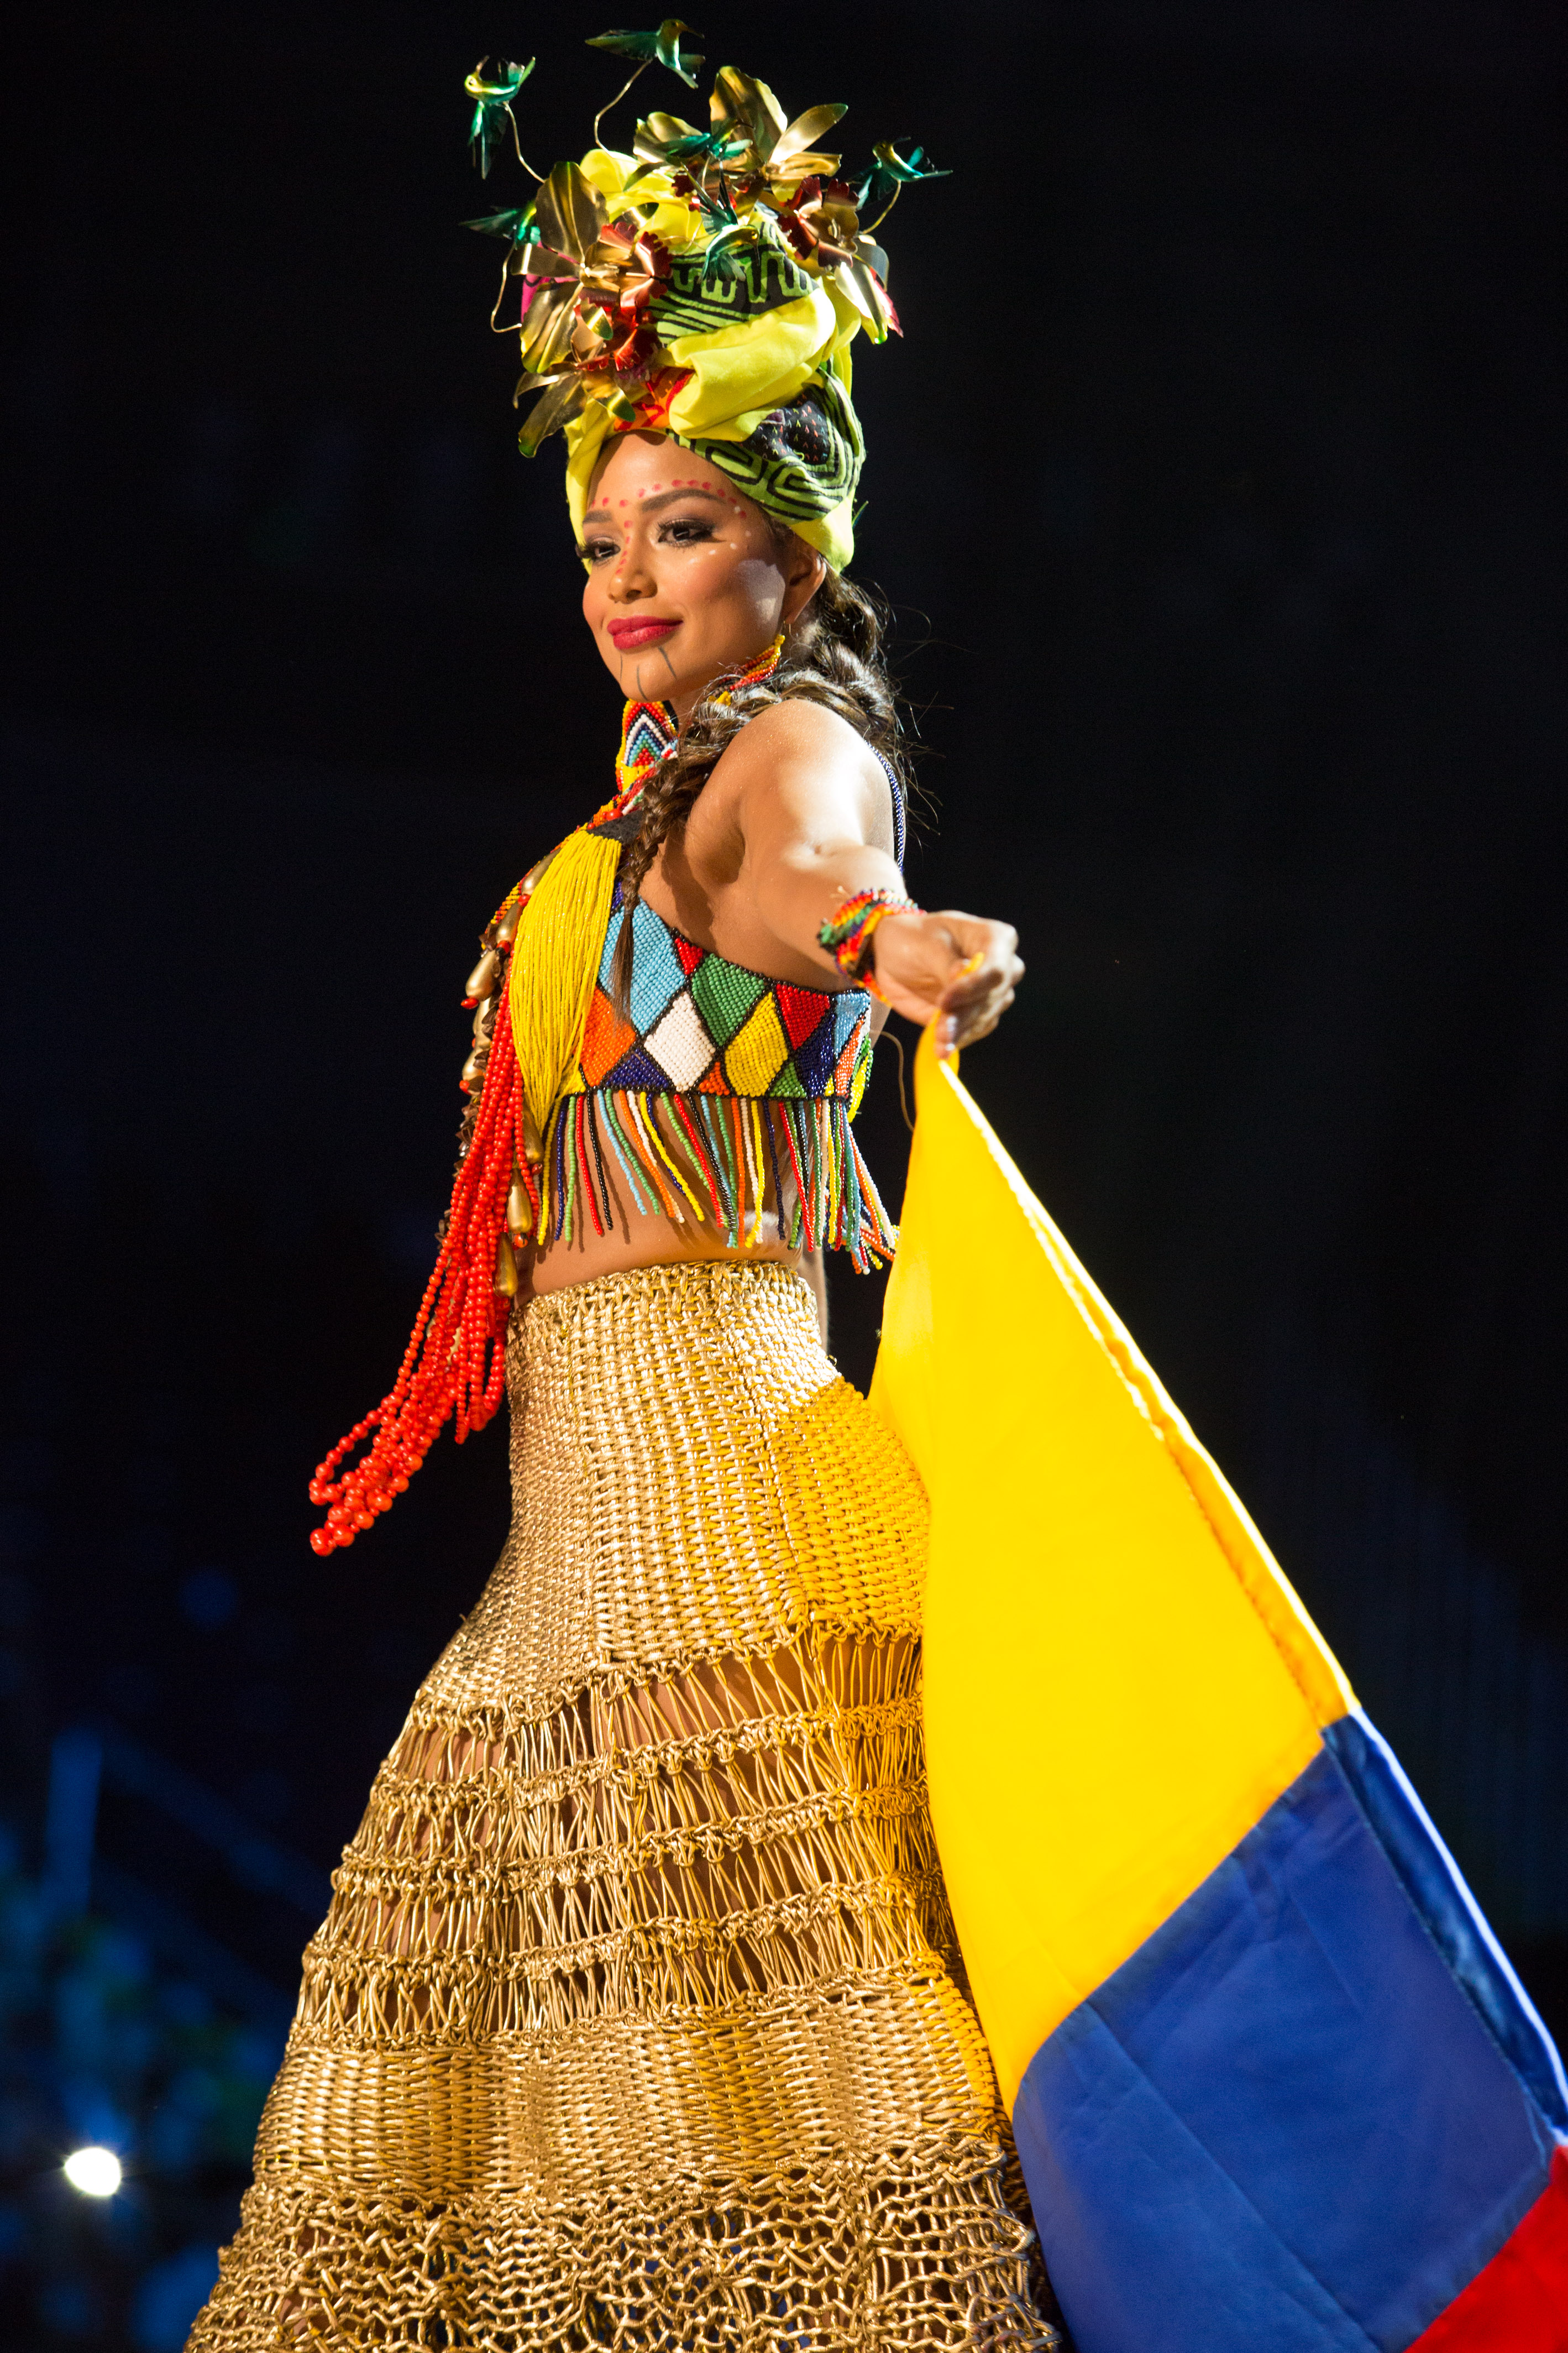 Andrea Tovar, Miss Colombia 2016 debuts her National Costume on stage at the Mall of Asia Arena on Thursday, January 25, 2017. The contestants have been touring, filming, rehearsing and preparing to compete for the Miss Universe crown in the Philippines. Tune in to the FOX telecast at 7:00 PM ET live/PT tape-delayed on Sunday, January 29, live from the Philippines to see who will become Miss Universe. HO/The Miss Universe Organization